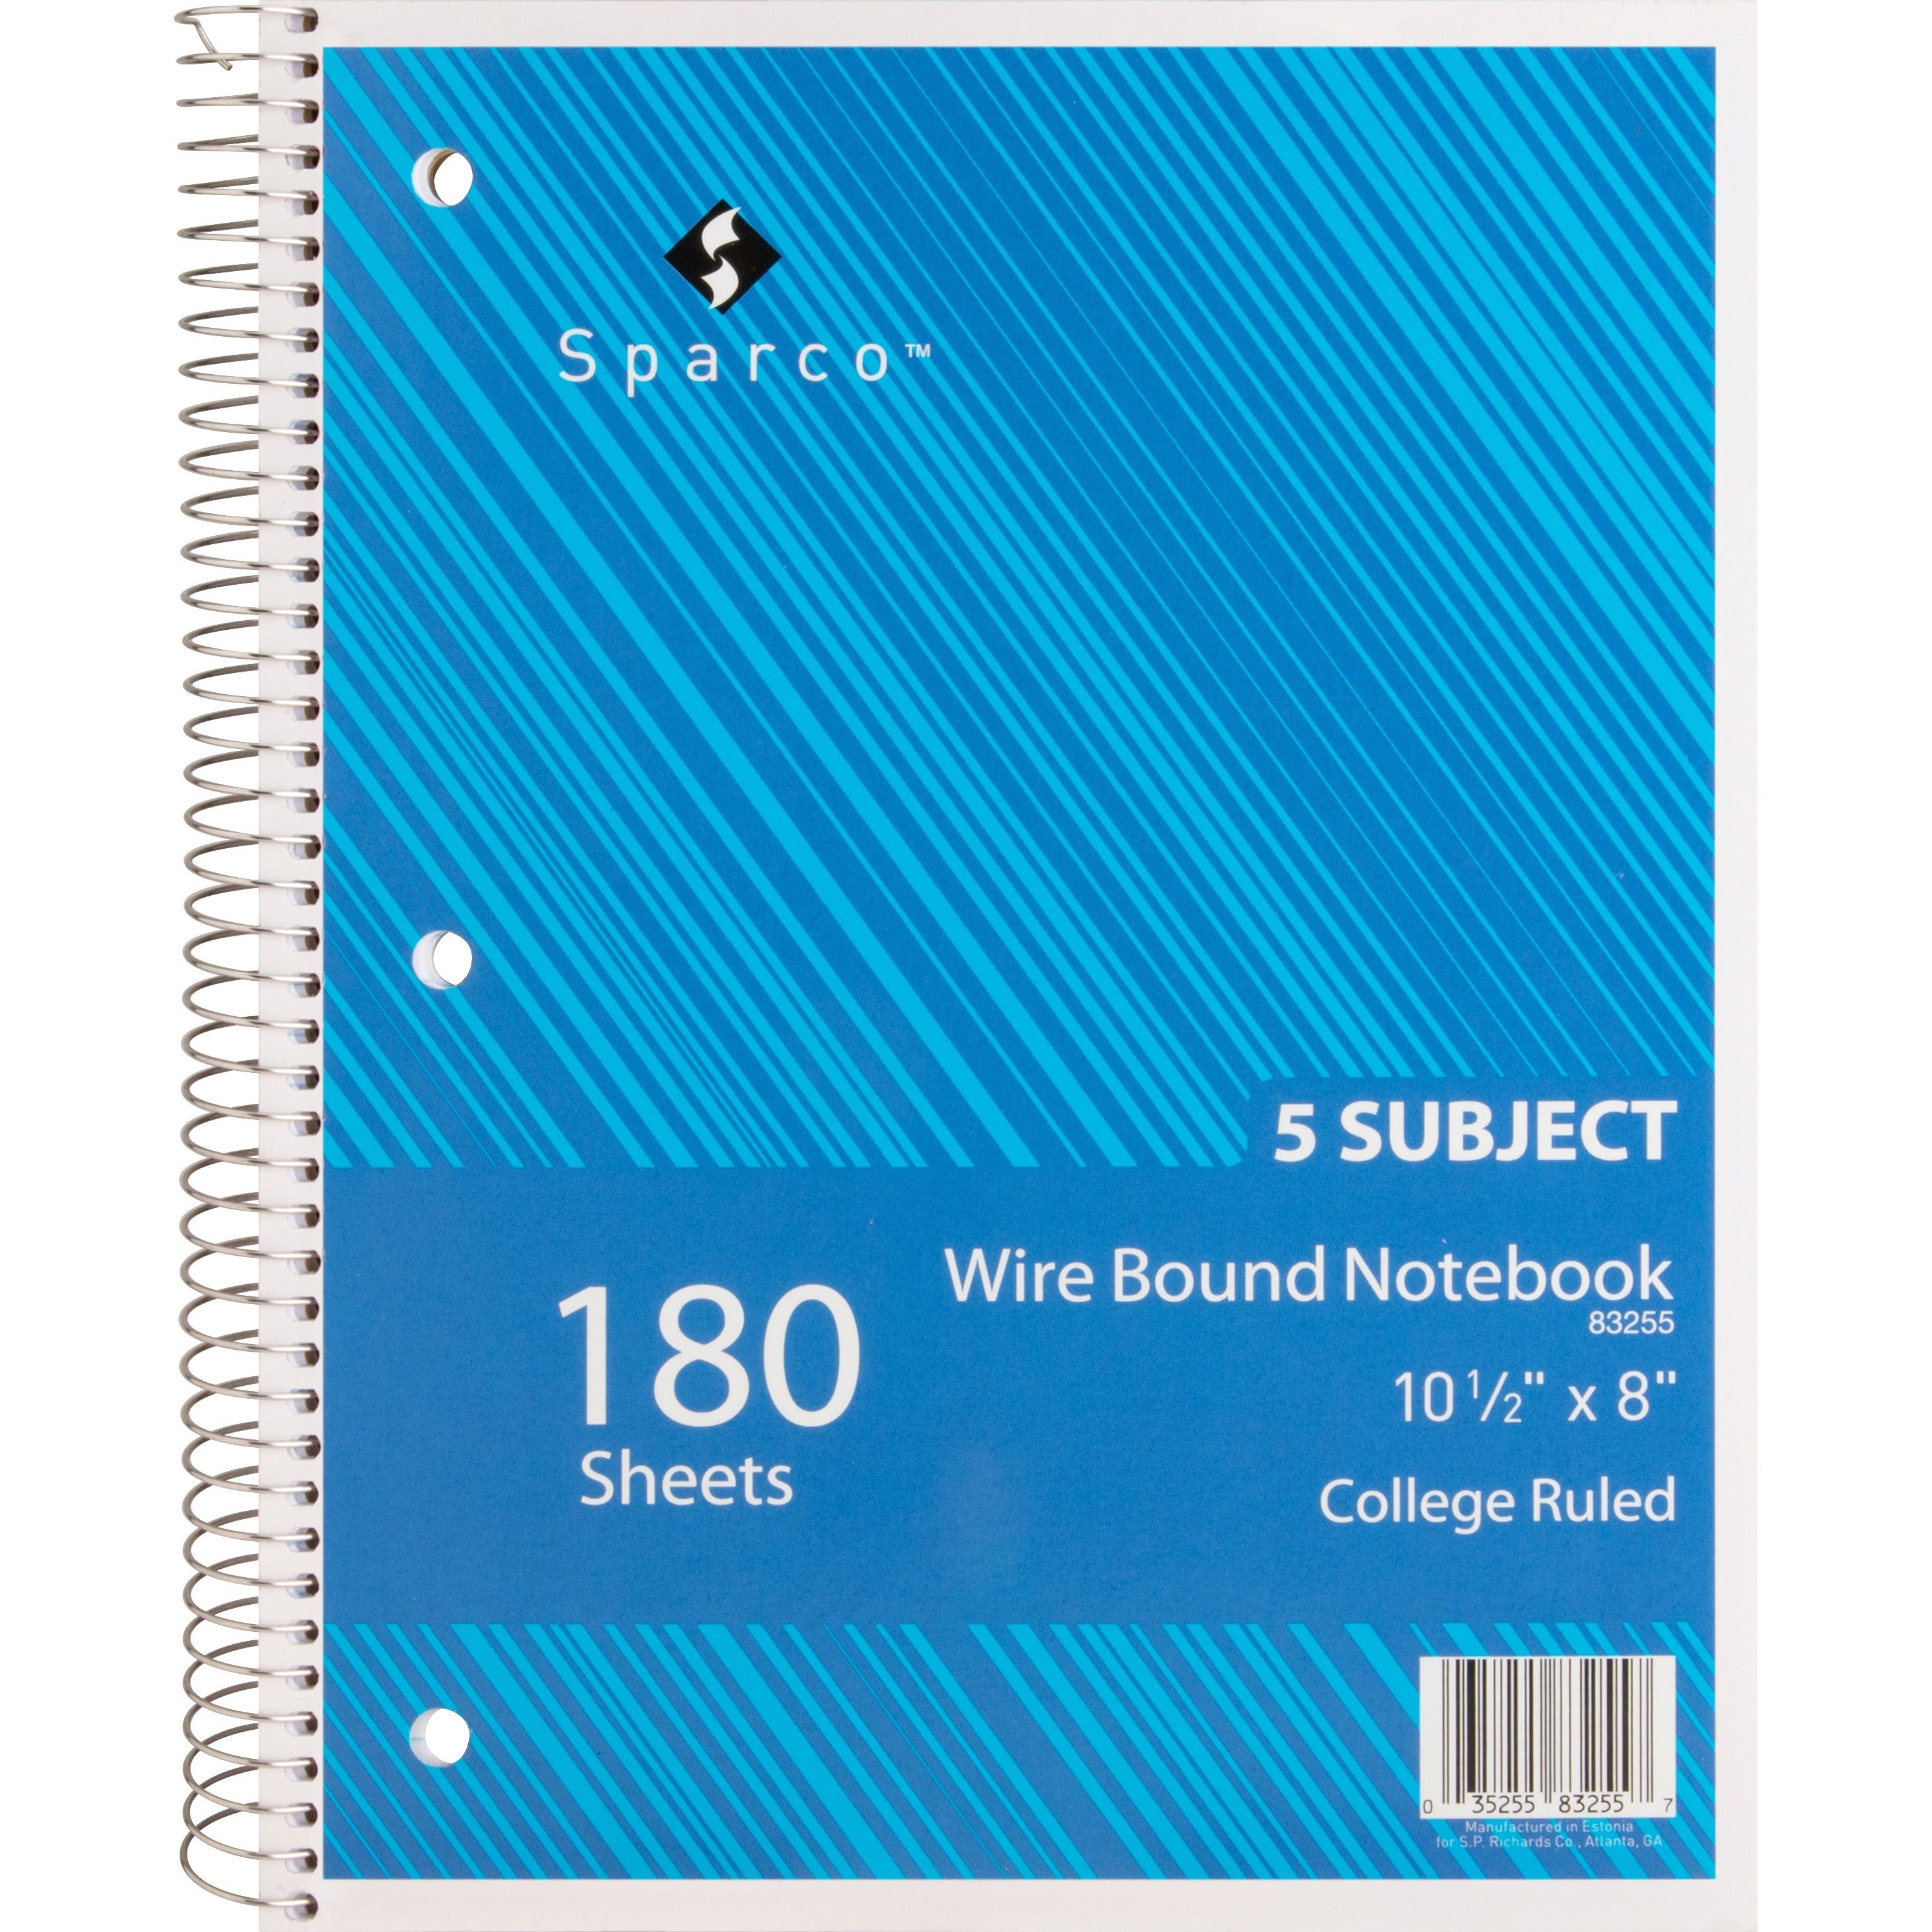 Sparco Wirebound College Ruled Notebooks - 180 Sheets - Wire Bound - College Ruled - Unruled Margin - 8" x 10 1/2" - Assorted Paper - AssortedChipboard Cover - Resist Bleed-through, Subject, Stiff-back, Stiff-cover - 1 Each - 